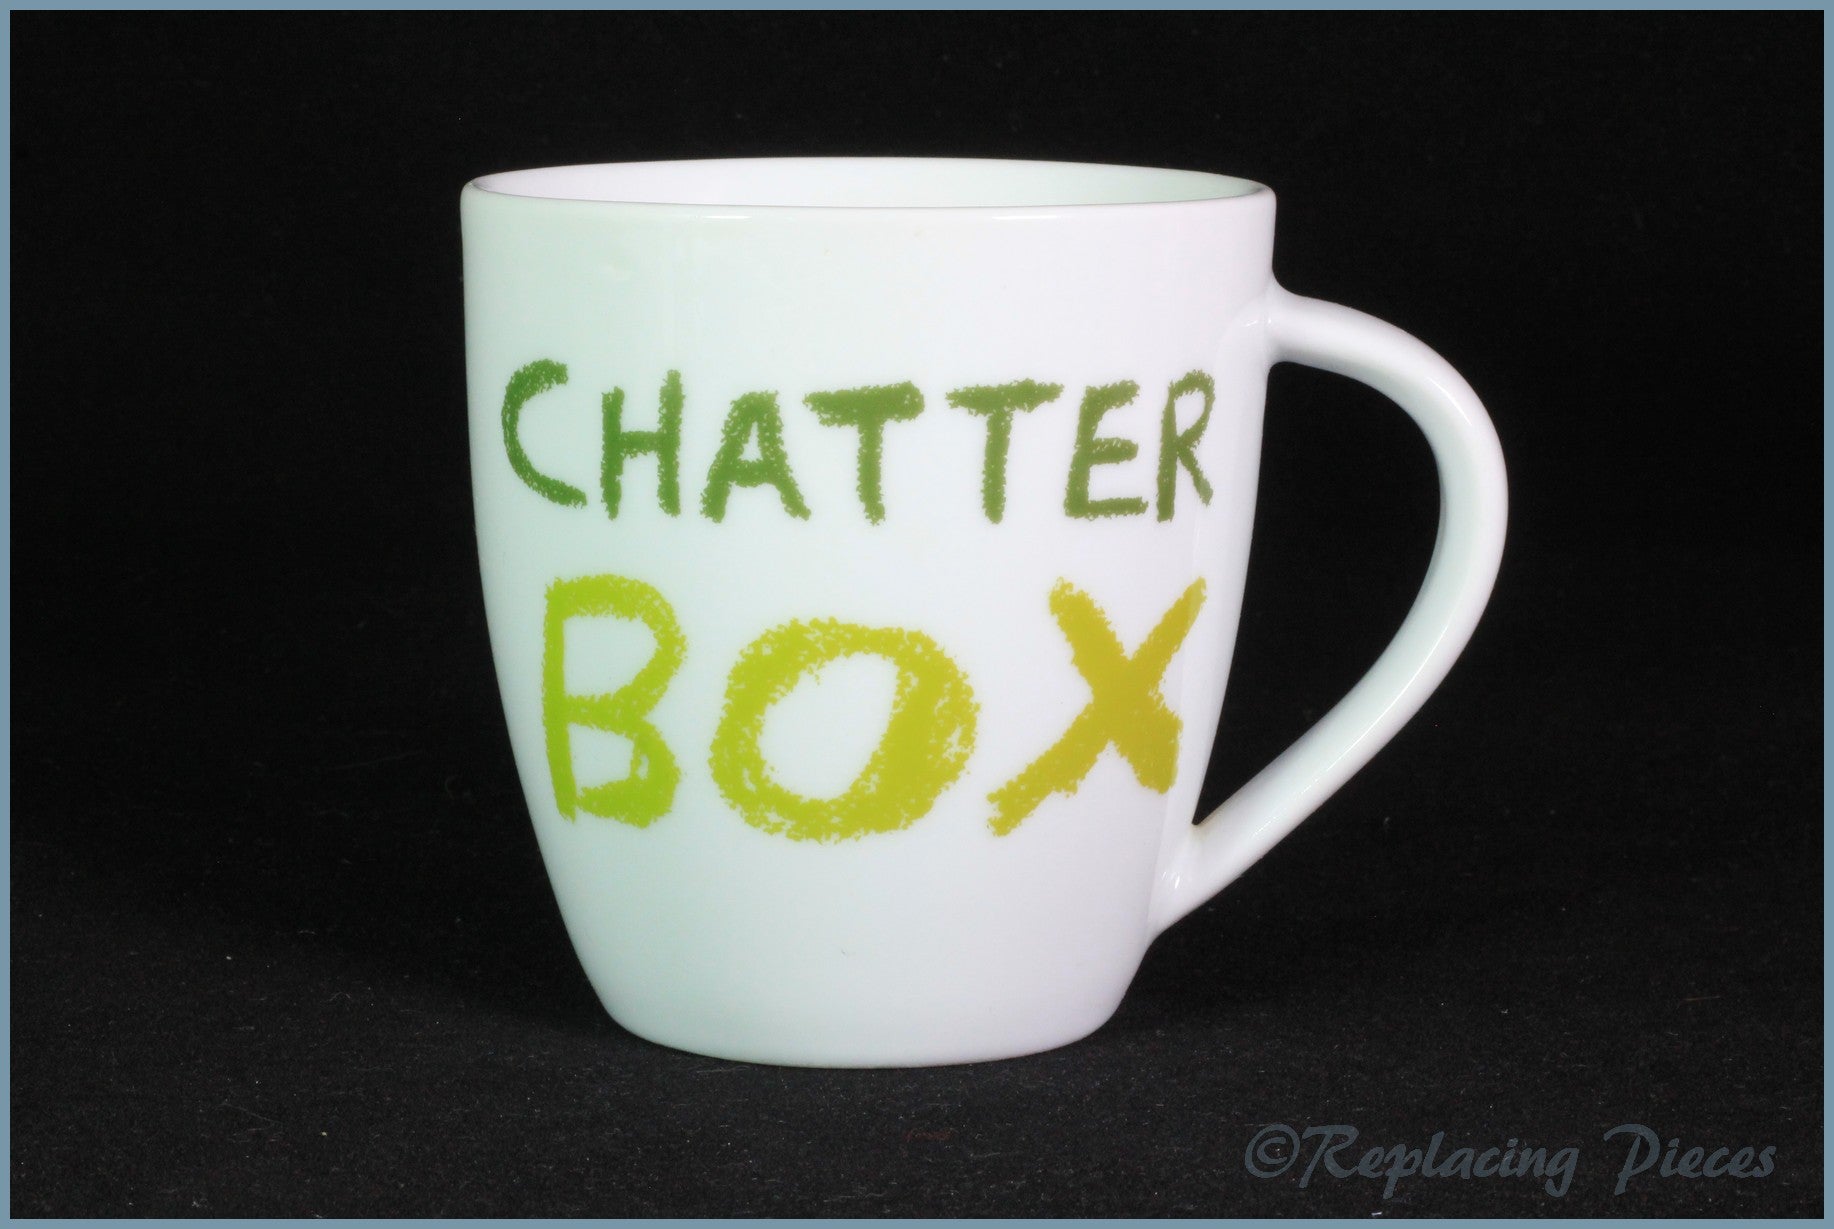 Queens - Jamie Oliver Mugs - Chatter Box